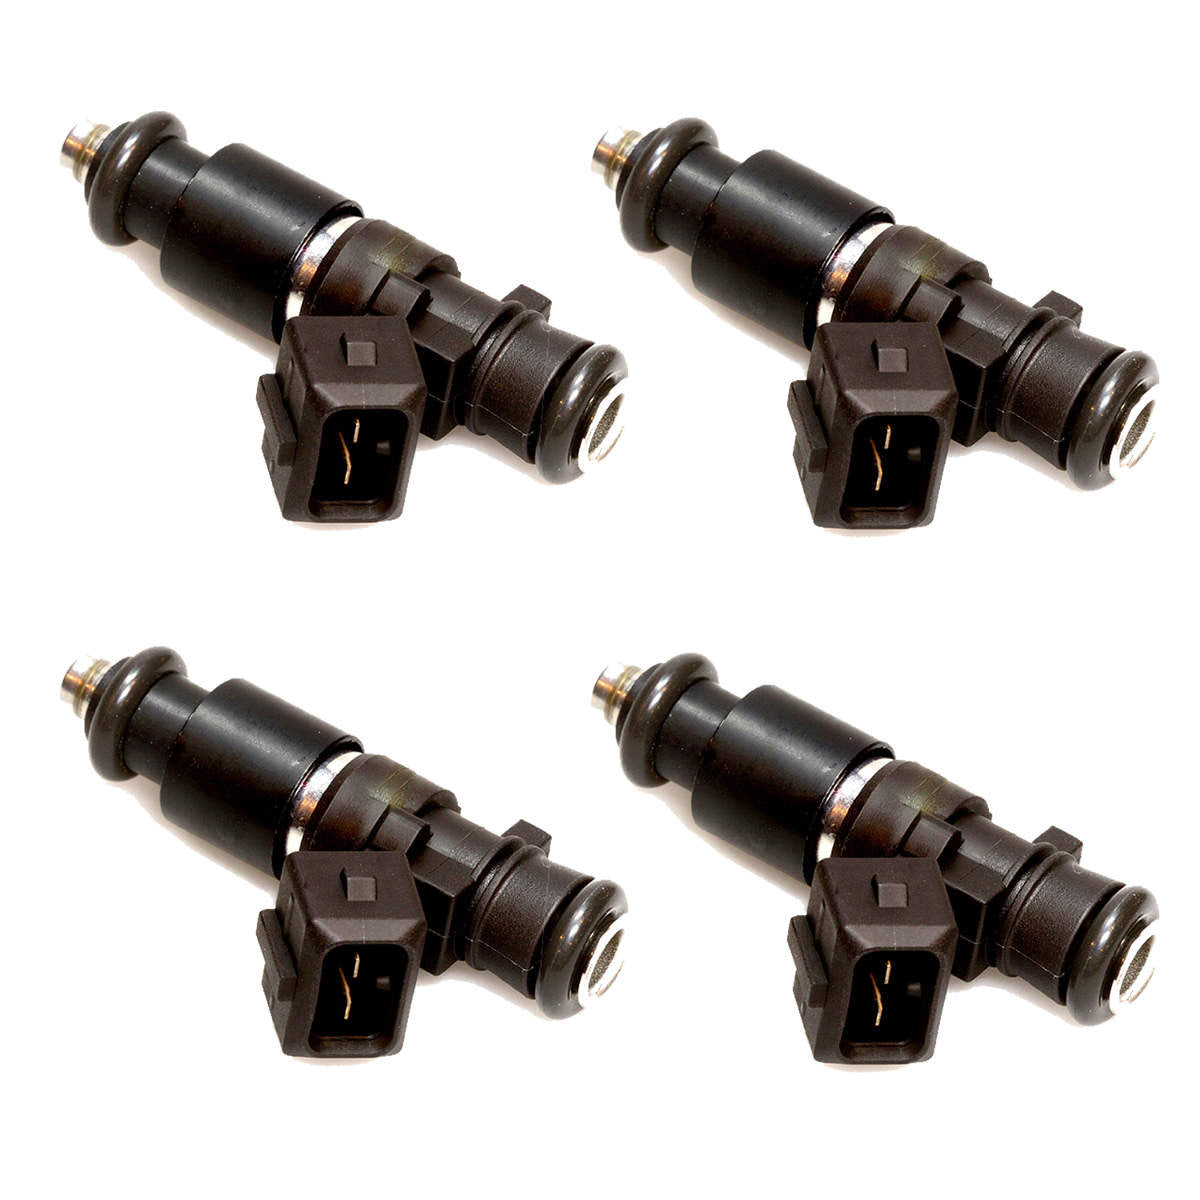 TOP FEED (4 units) | Fuel Injector Service 